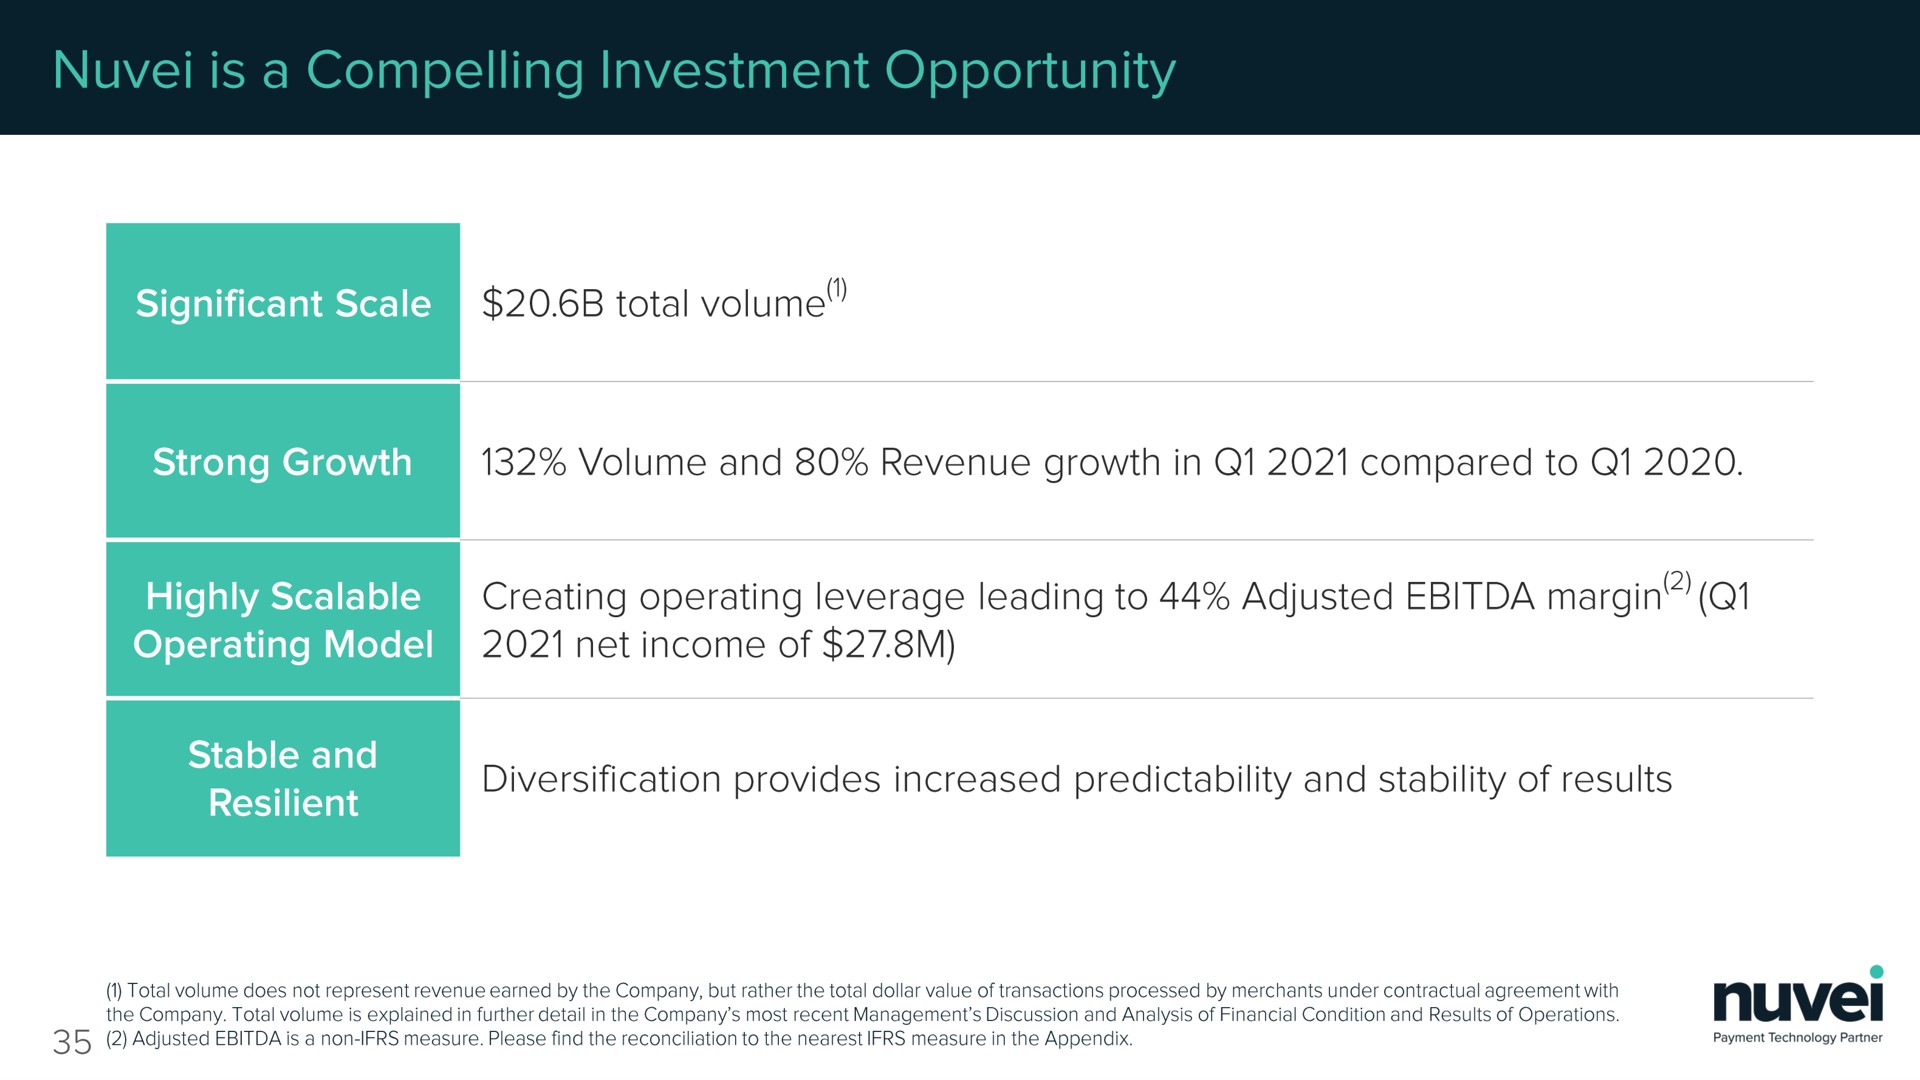 total volume an volume and revenue growth in compared to i eyey creating operating leverage leading to adjusted margin net income of | Nuvei